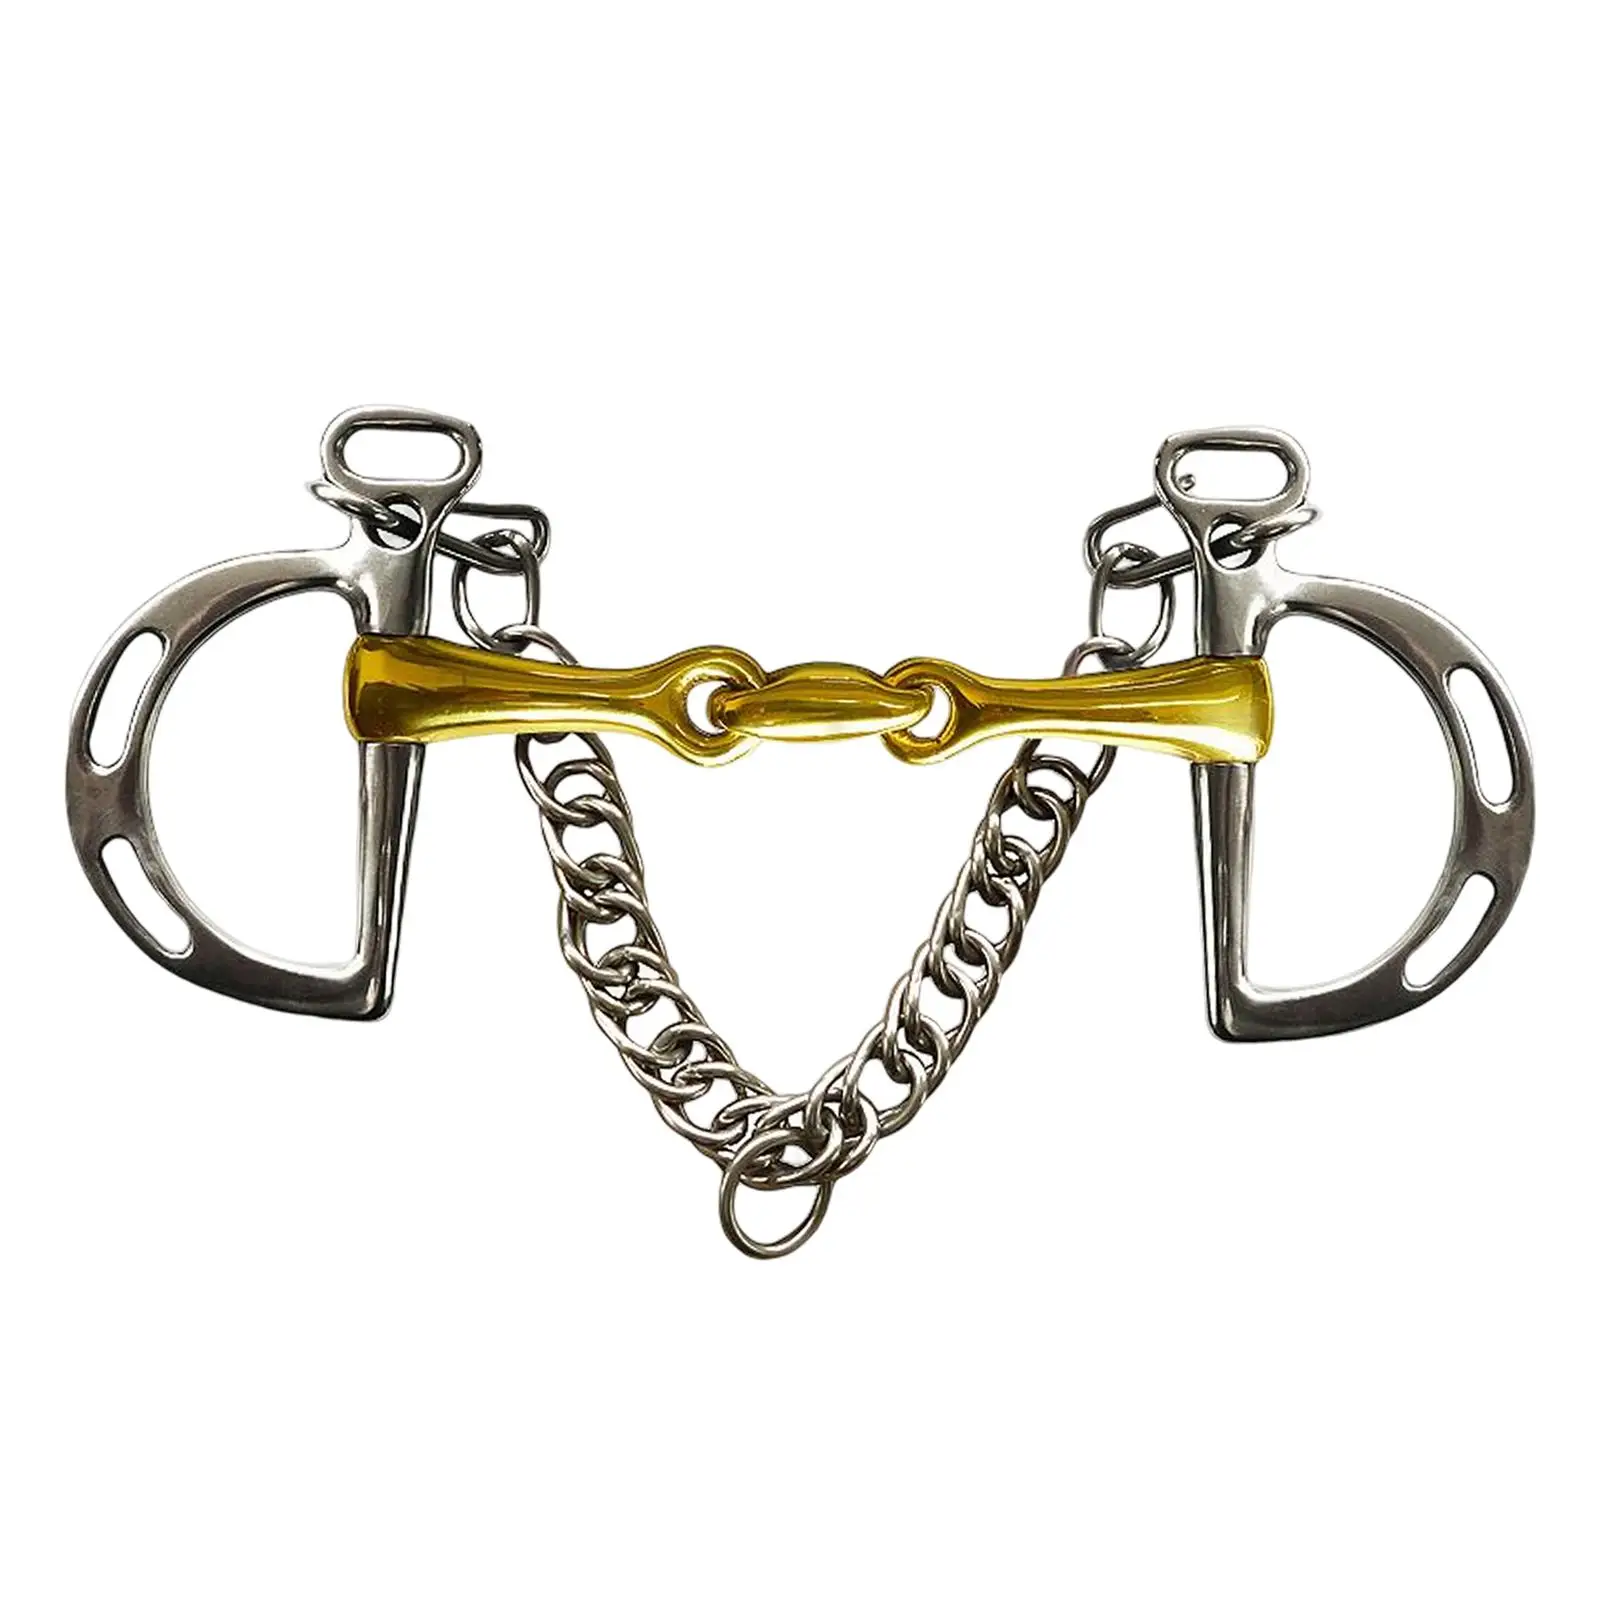 Horse Bit Copper Mouth Stainless Steel Training Equipment Horse Chewing